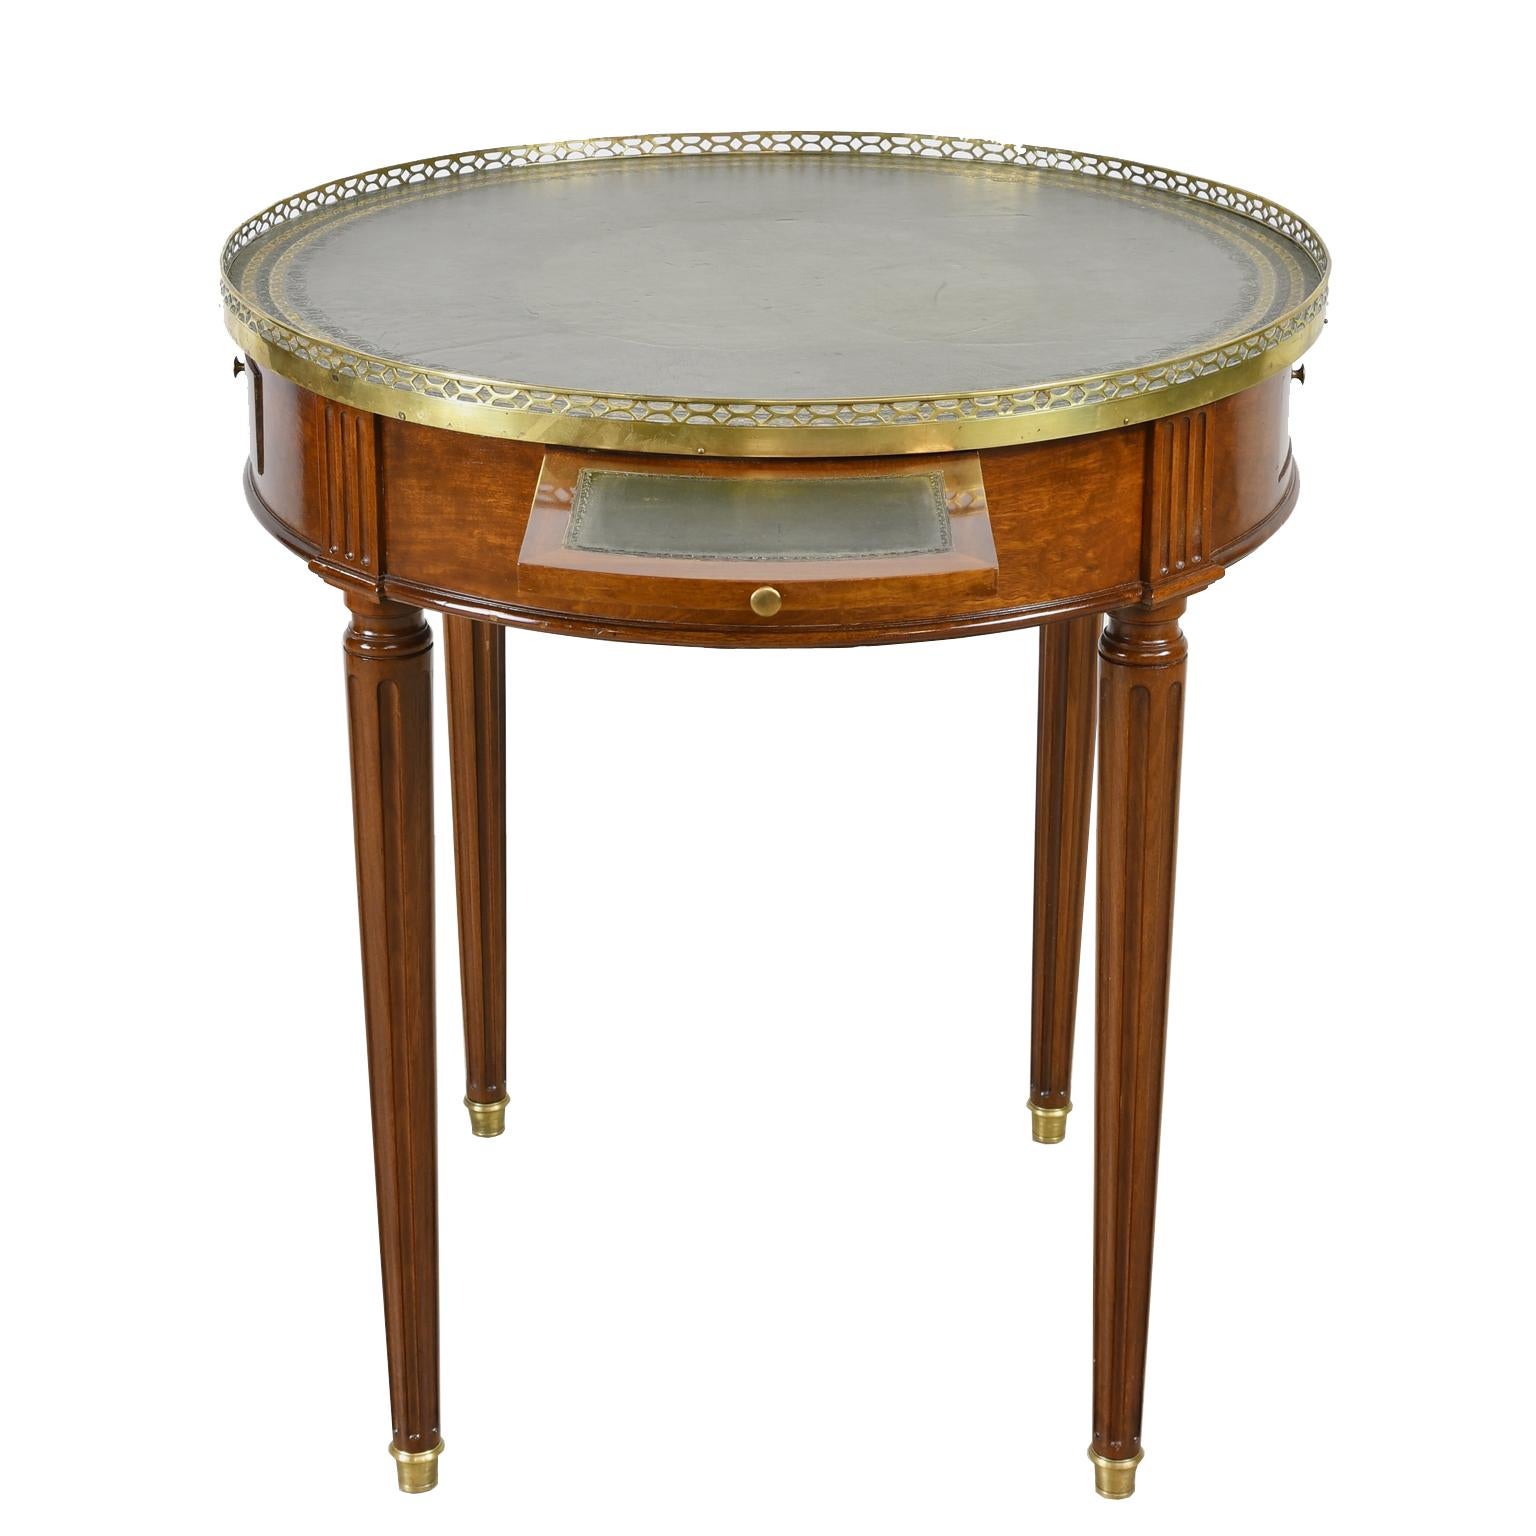 A French Bouillotte table in African mahogany in the Directoire style with dark green leather top with gilded and embossed border, and brass gallery. Round tabletop rests on turned and reeded legs with brass sabots and offers two drawers and two